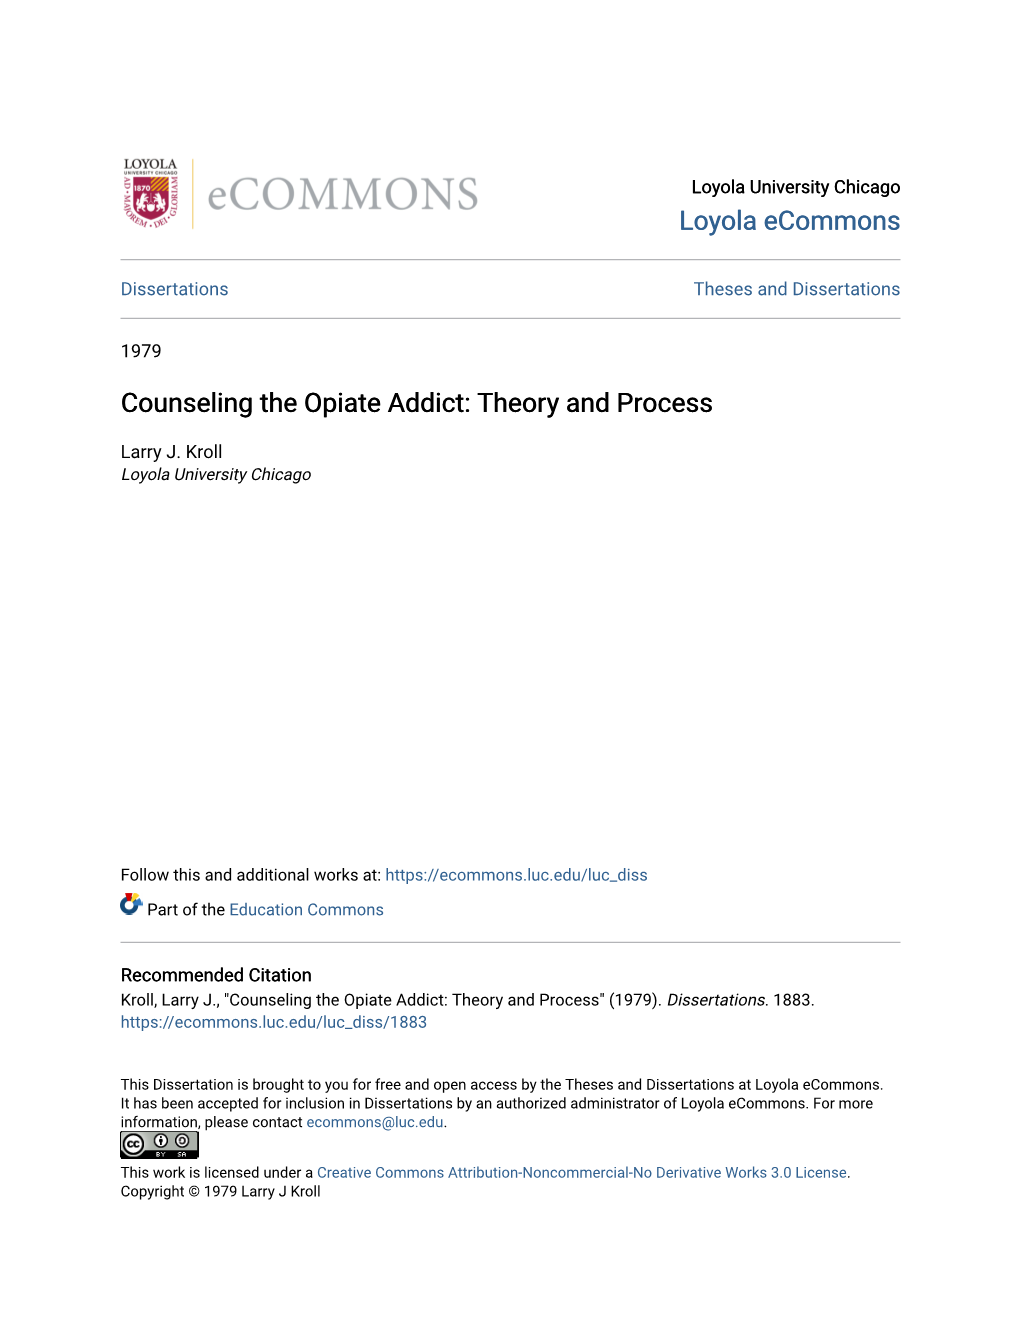 Counseling the Opiate Addict: Theory and Process